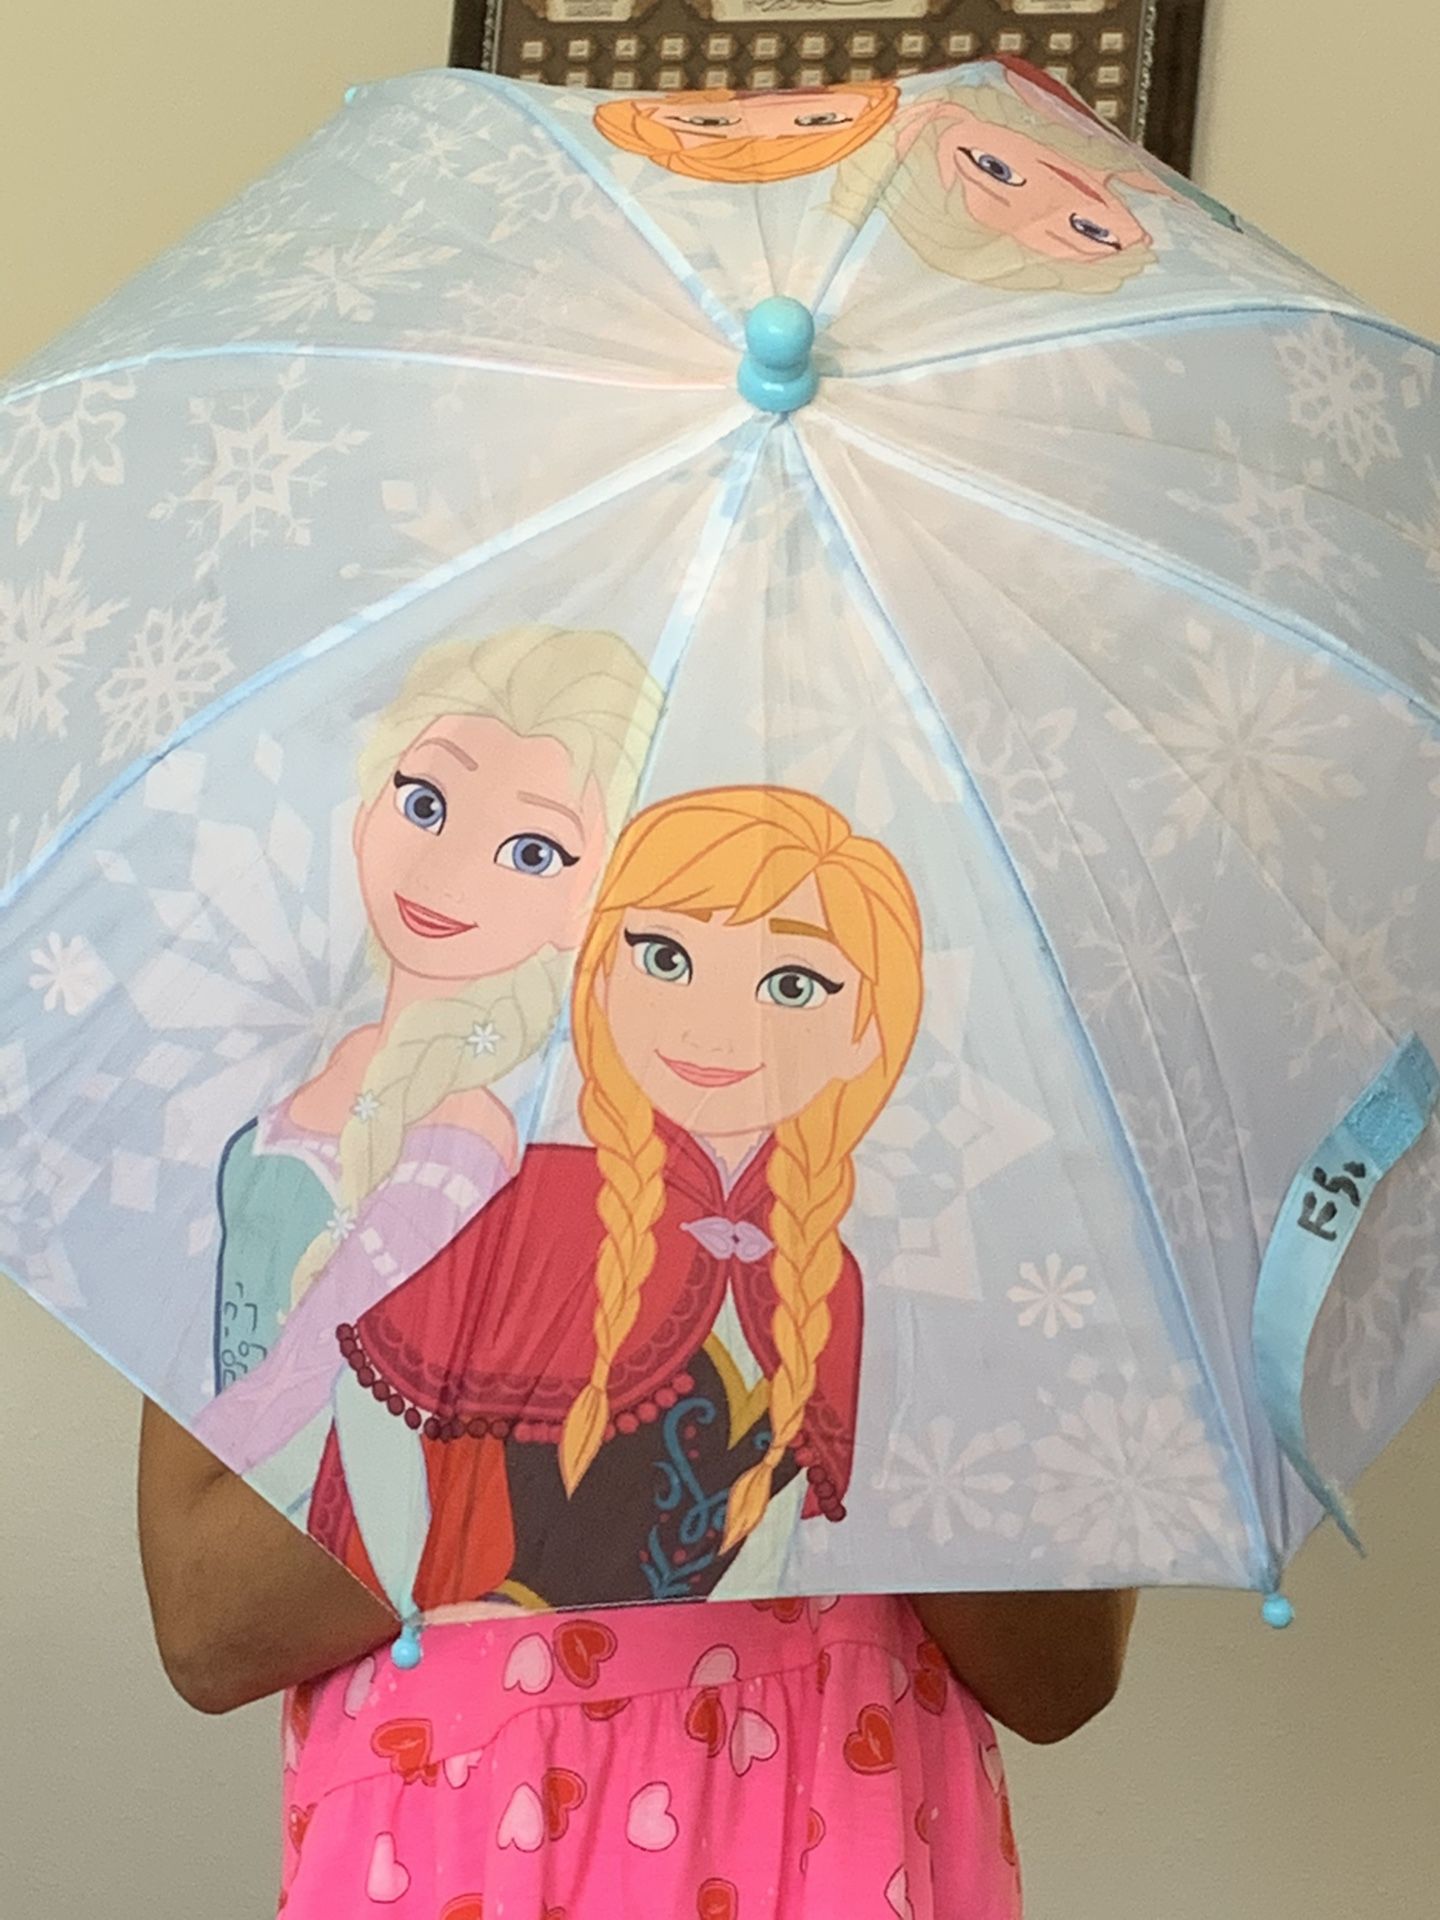 2 of These $5 each. Elsa and Ana (frozen) little girl’s umbrellas